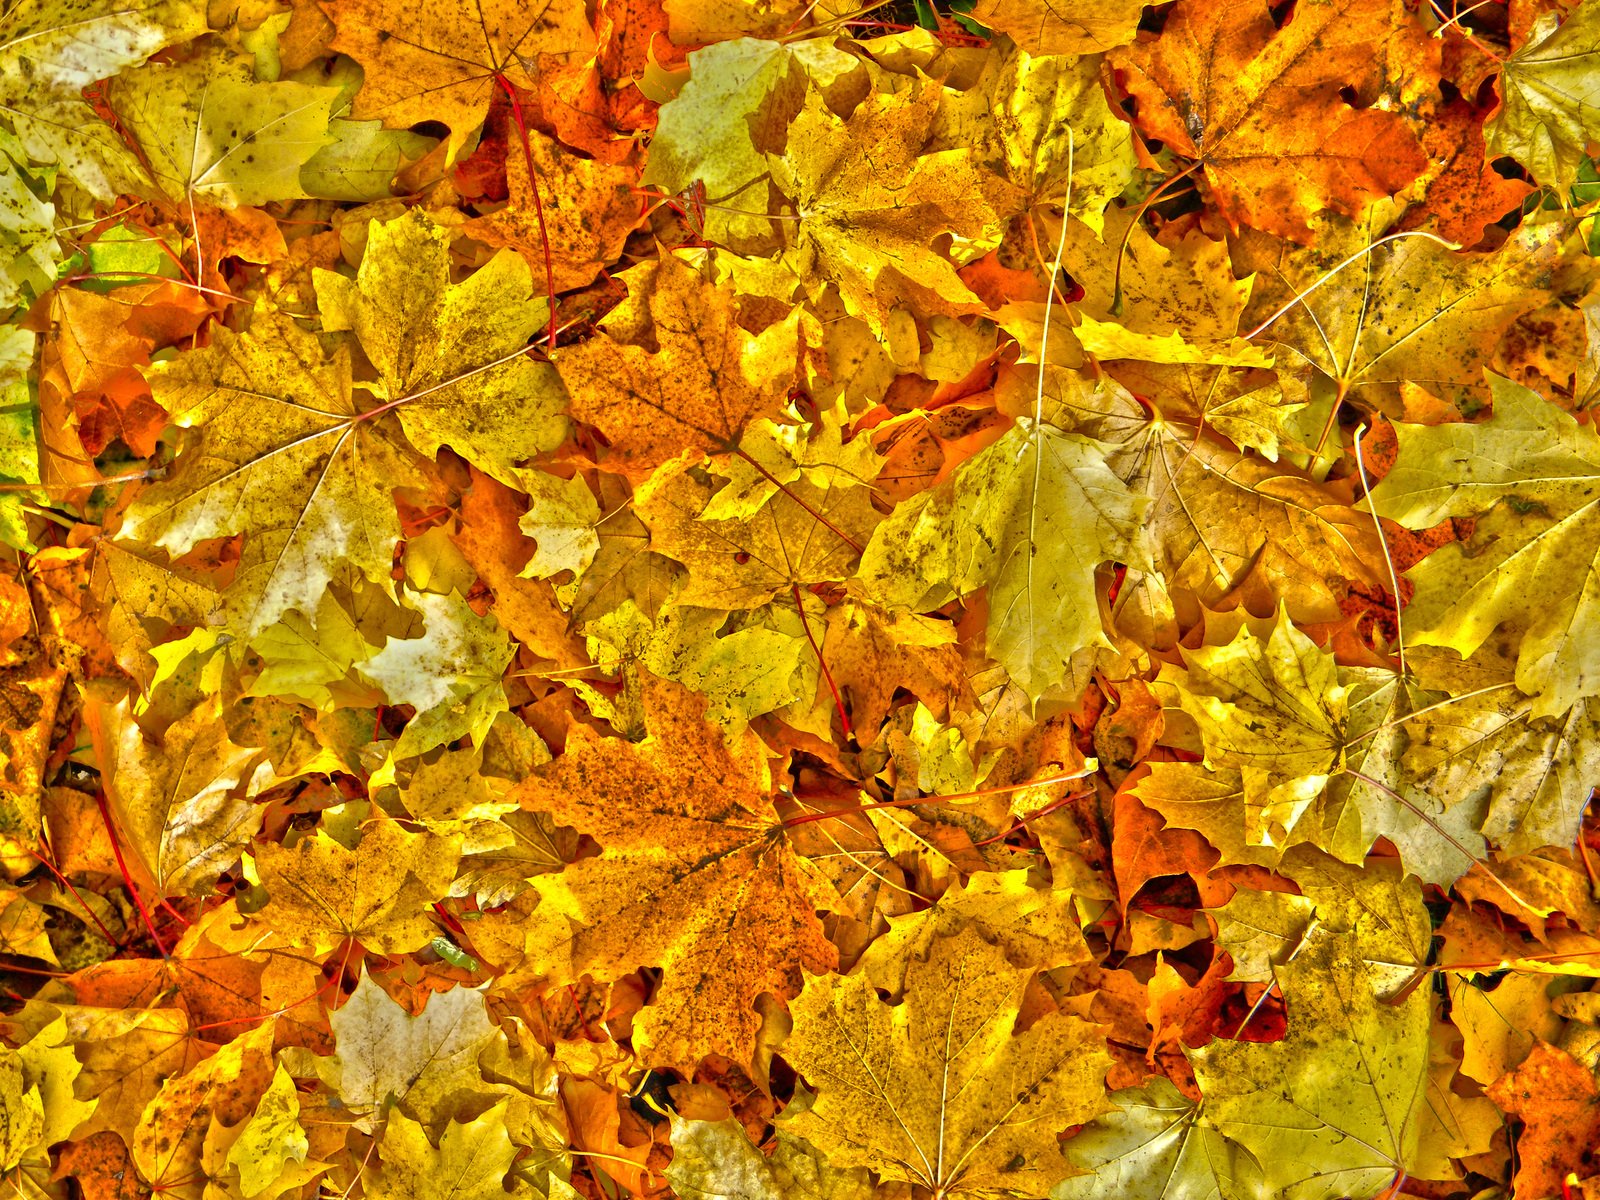 an old, colorful, background image showing different yellow and red leaves